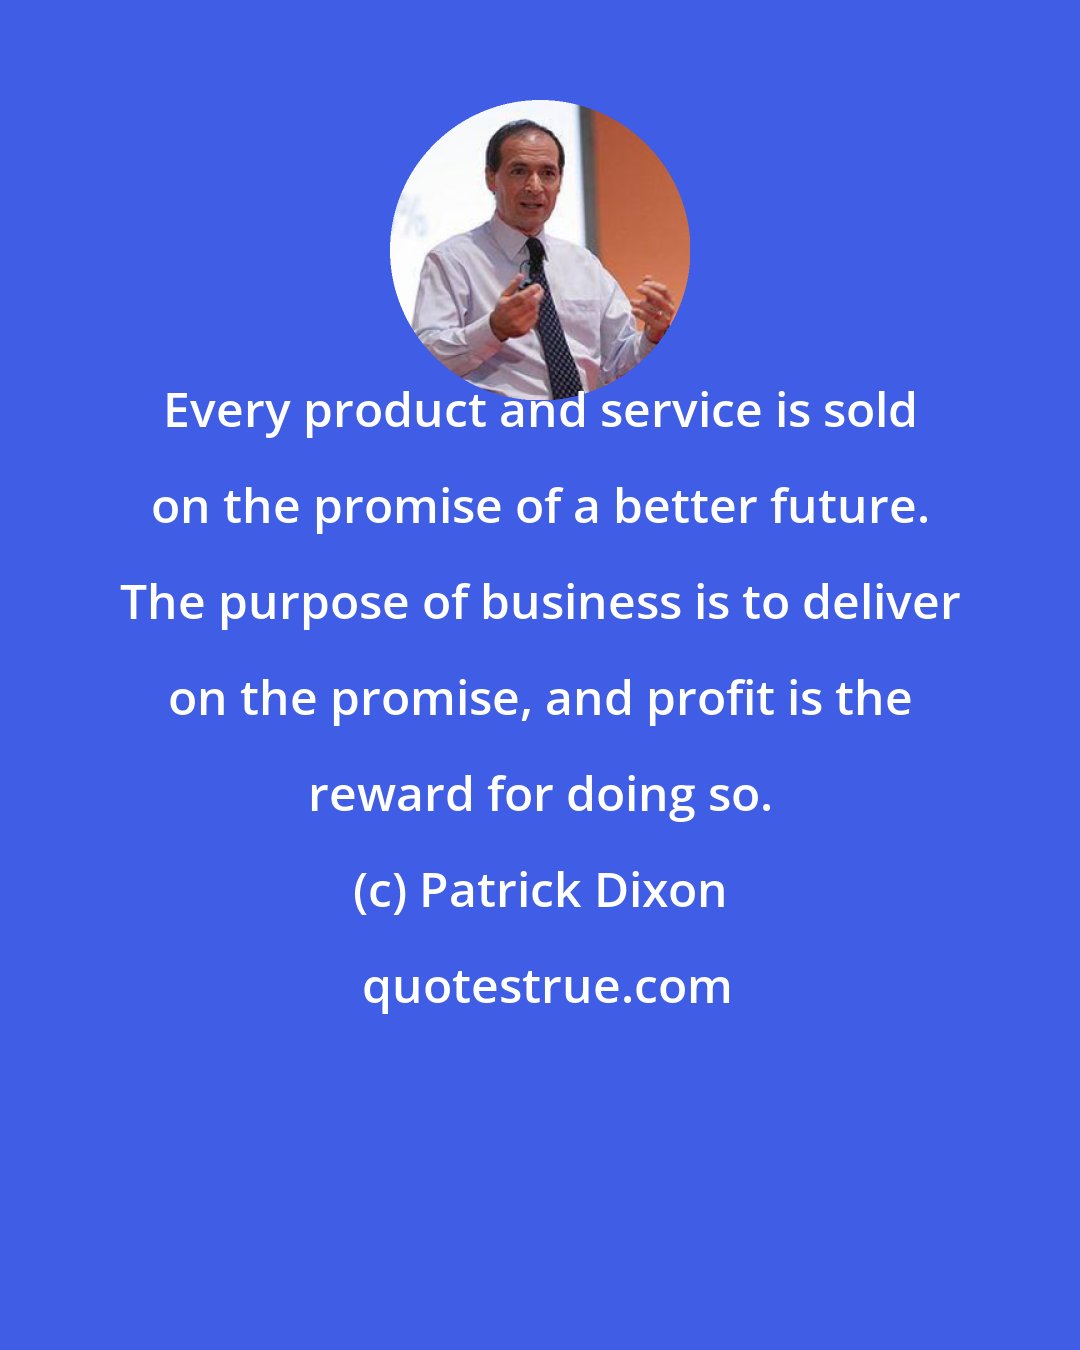 Patrick Dixon: Every product and service is sold on the promise of a better future. The purpose of business is to deliver on the promise, and profit is the reward for doing so.